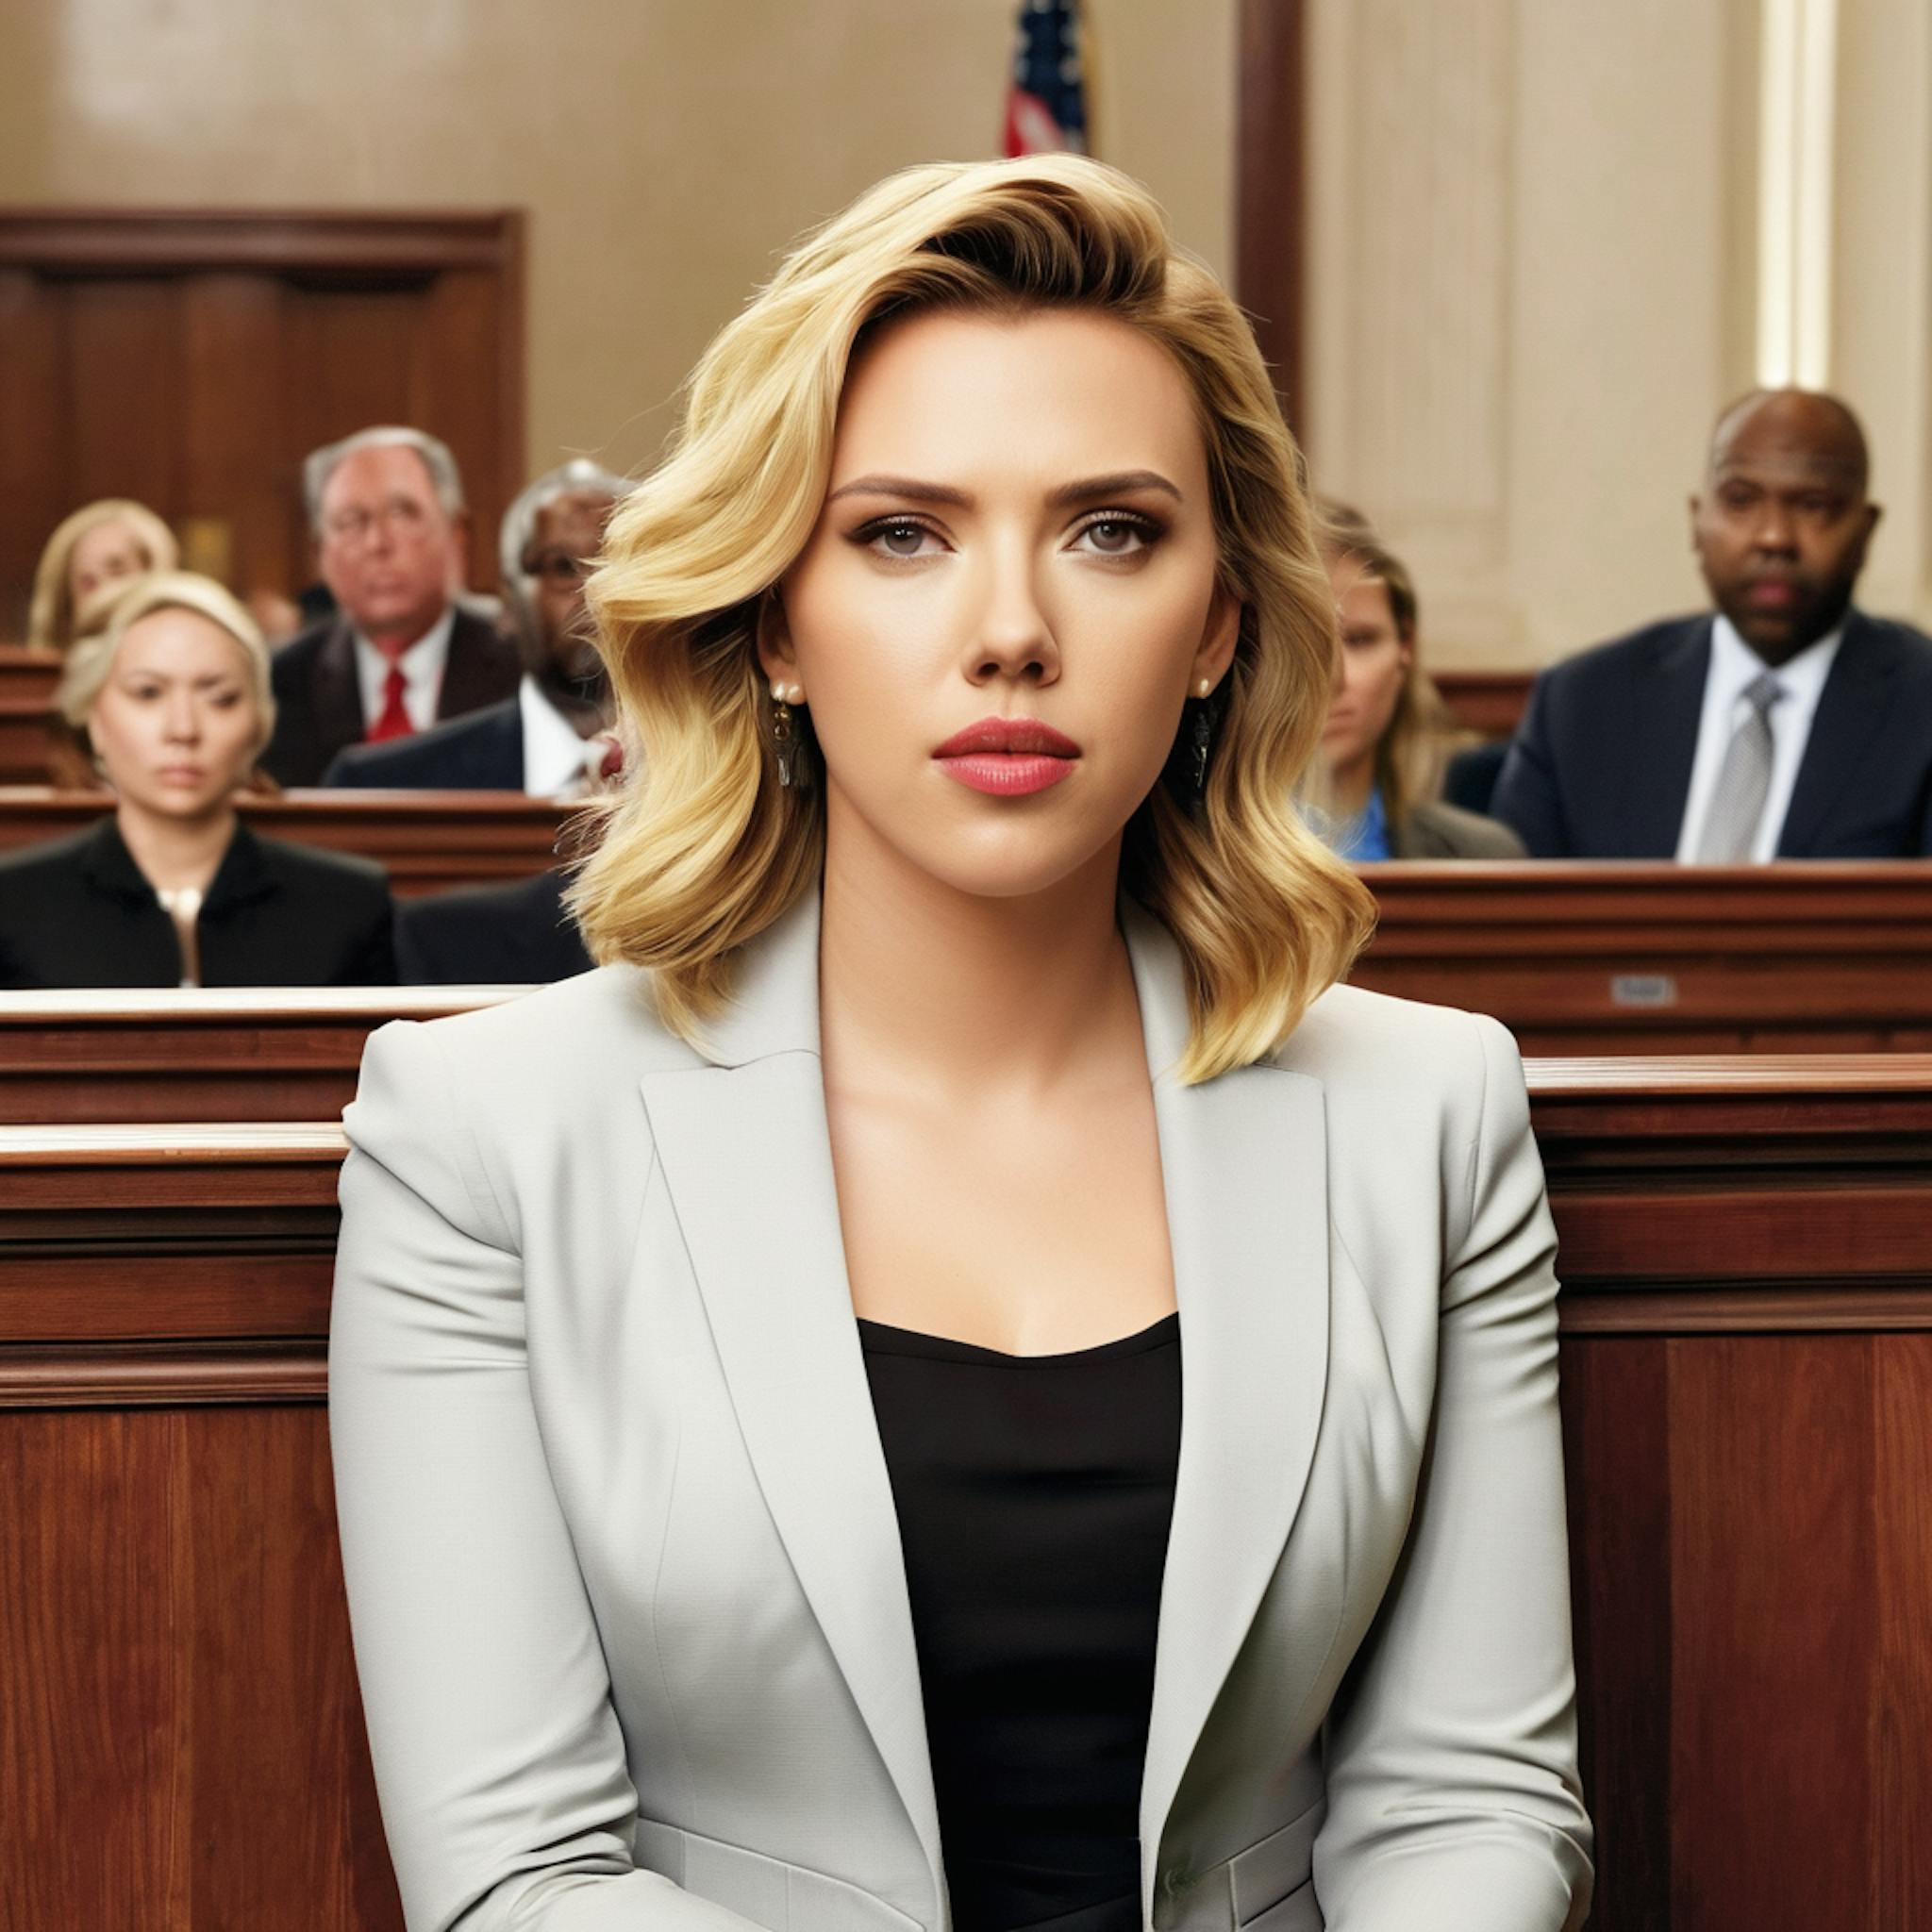 featured image - Scarlett Johansson Puts Disney on Blast for Intentionally Interfering With Her Contract